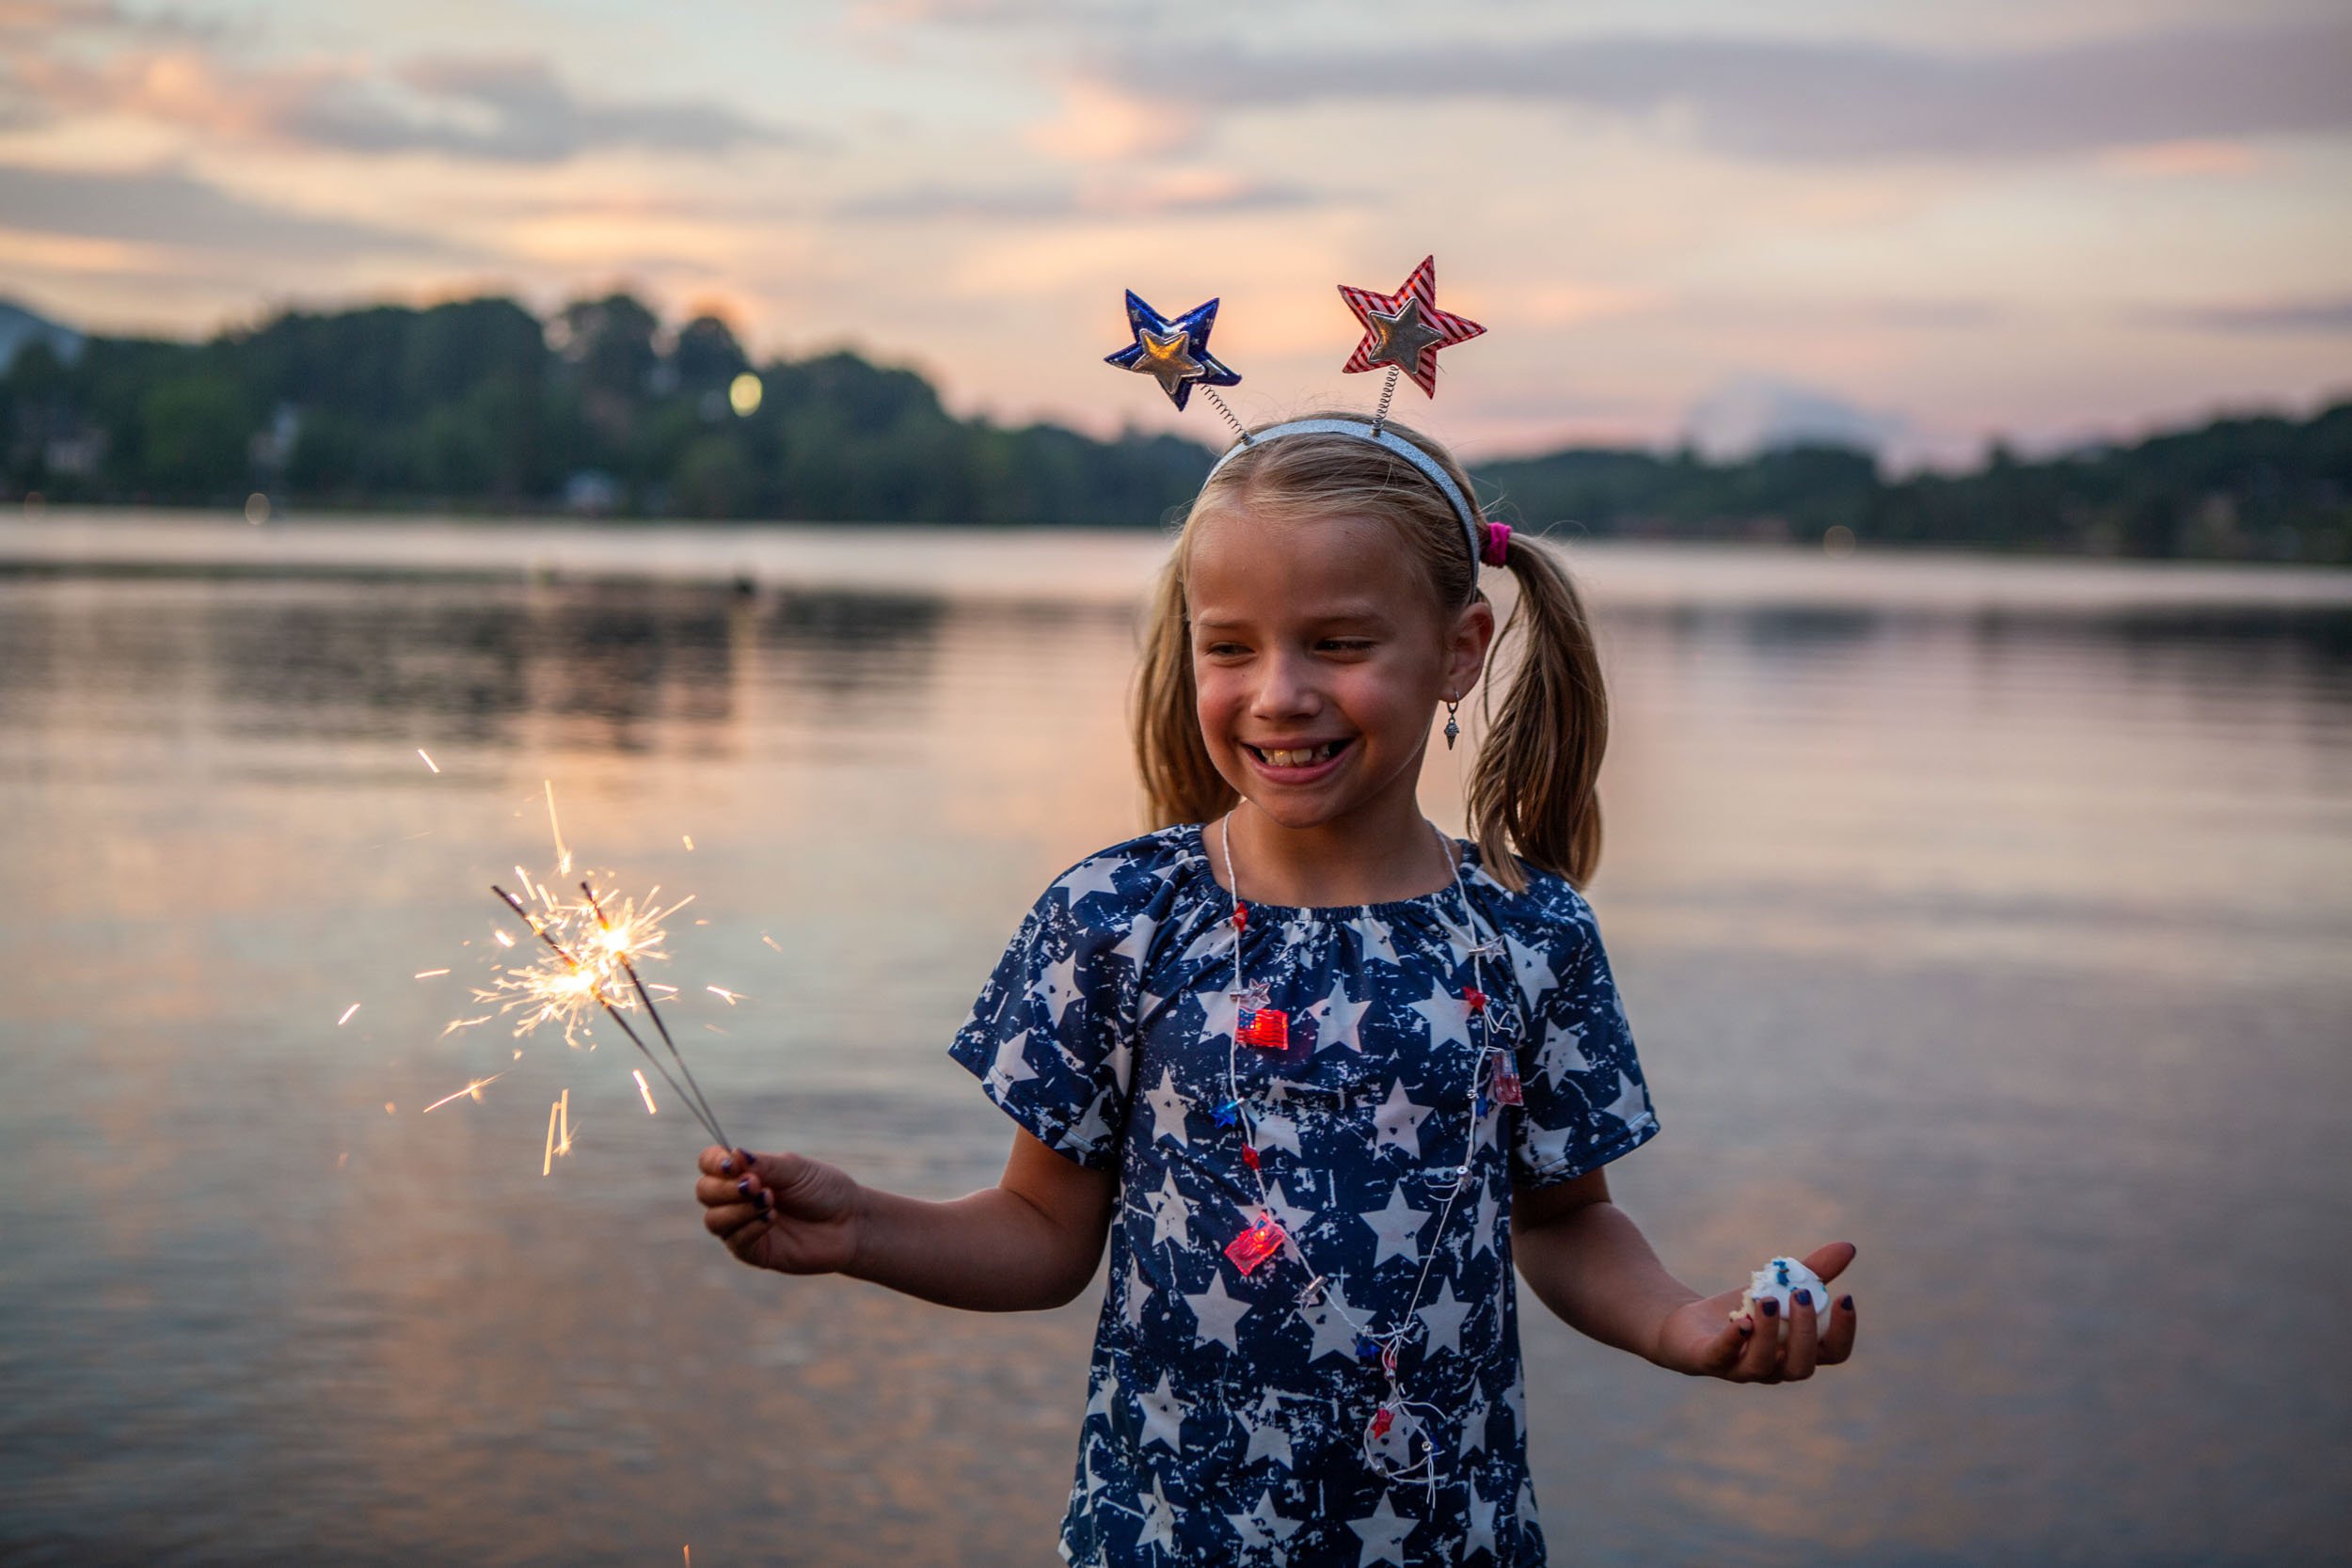 A girl enjoys a sparkler along the lakeshore before the fireworks show-1